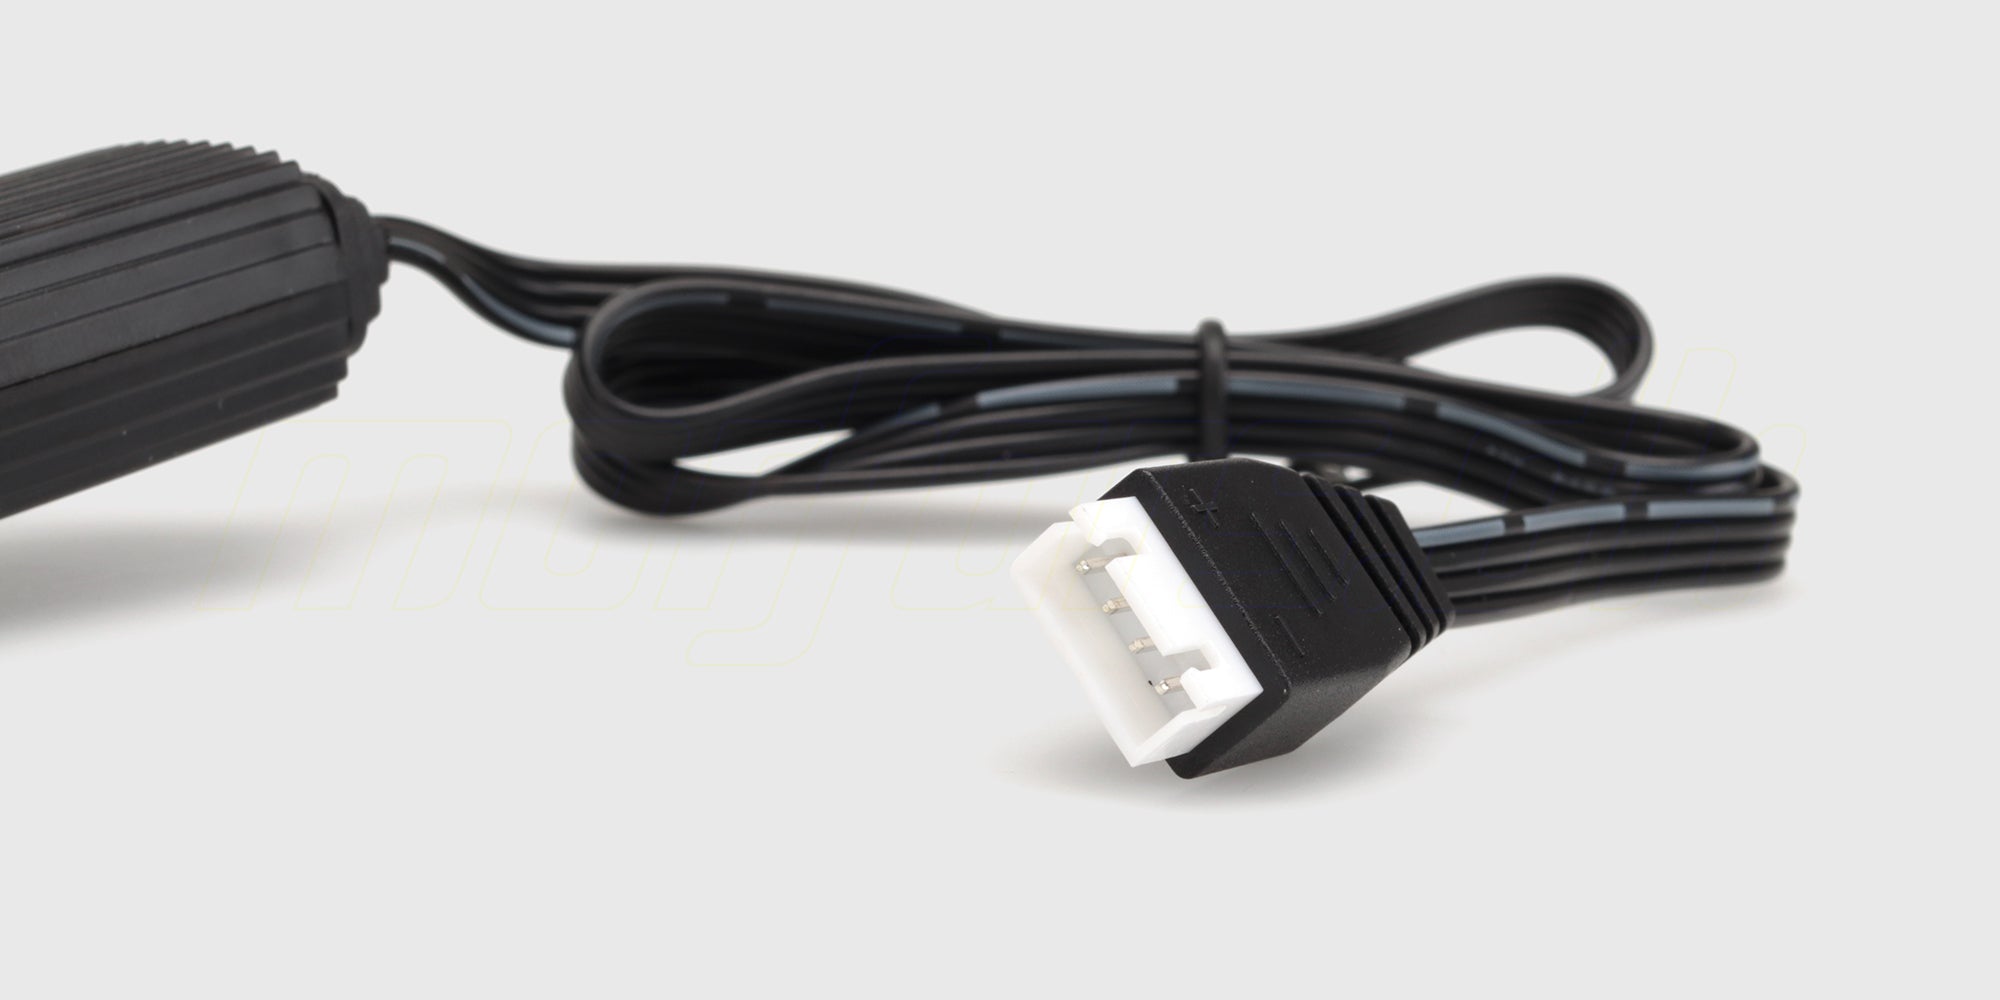 HyperGo USB charging cable for 3S battery